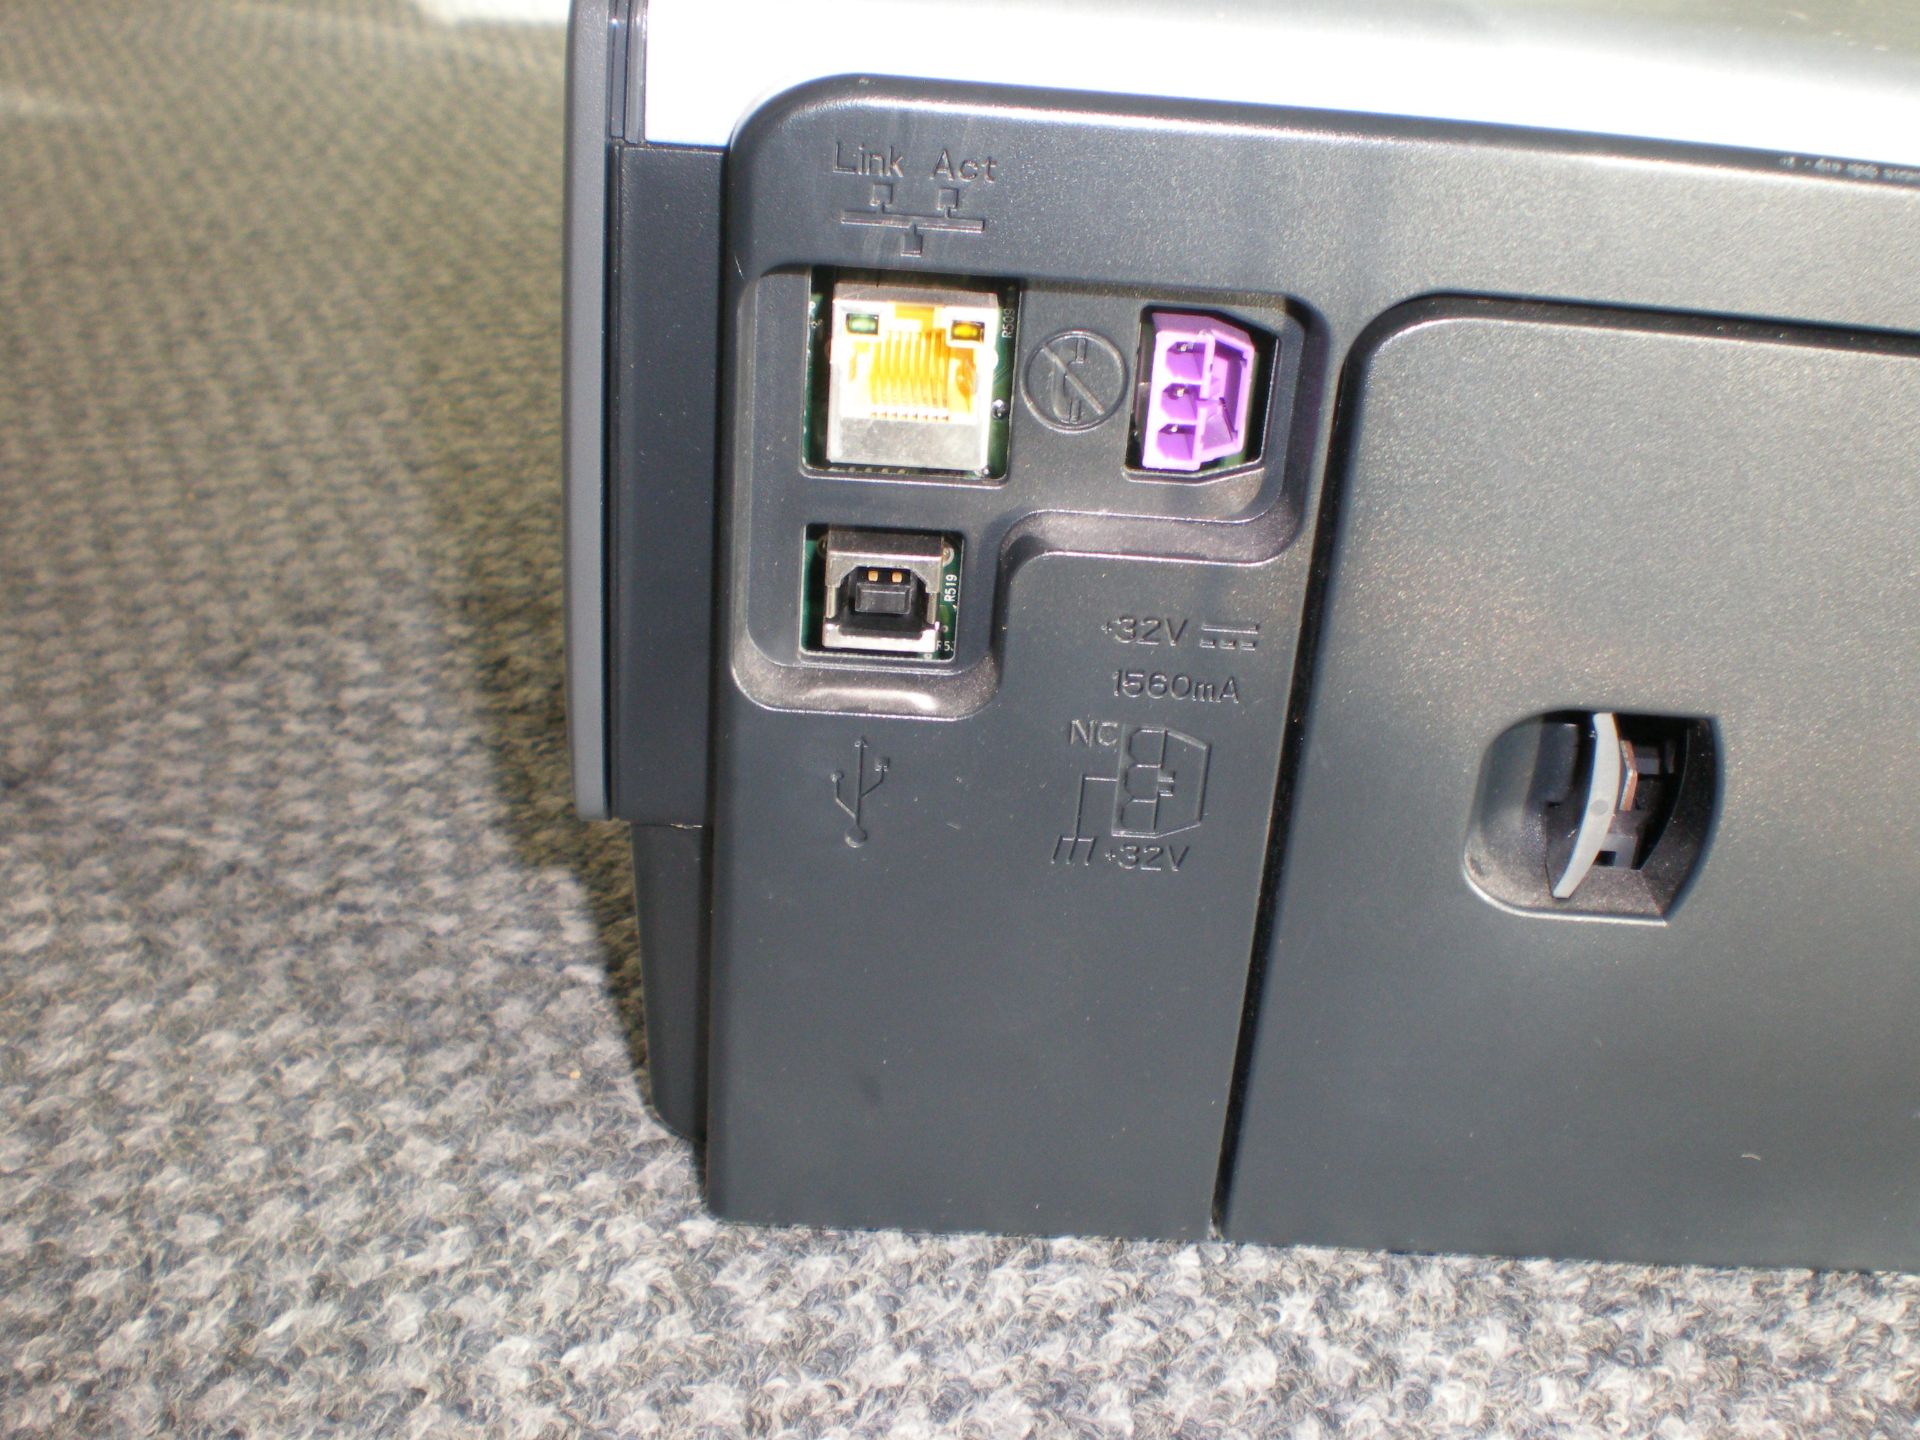 Hp Deskjet 6940 Printer With Power Supply Print On Network Or Direct Via A Usb Cable Input - Image 3 of 3